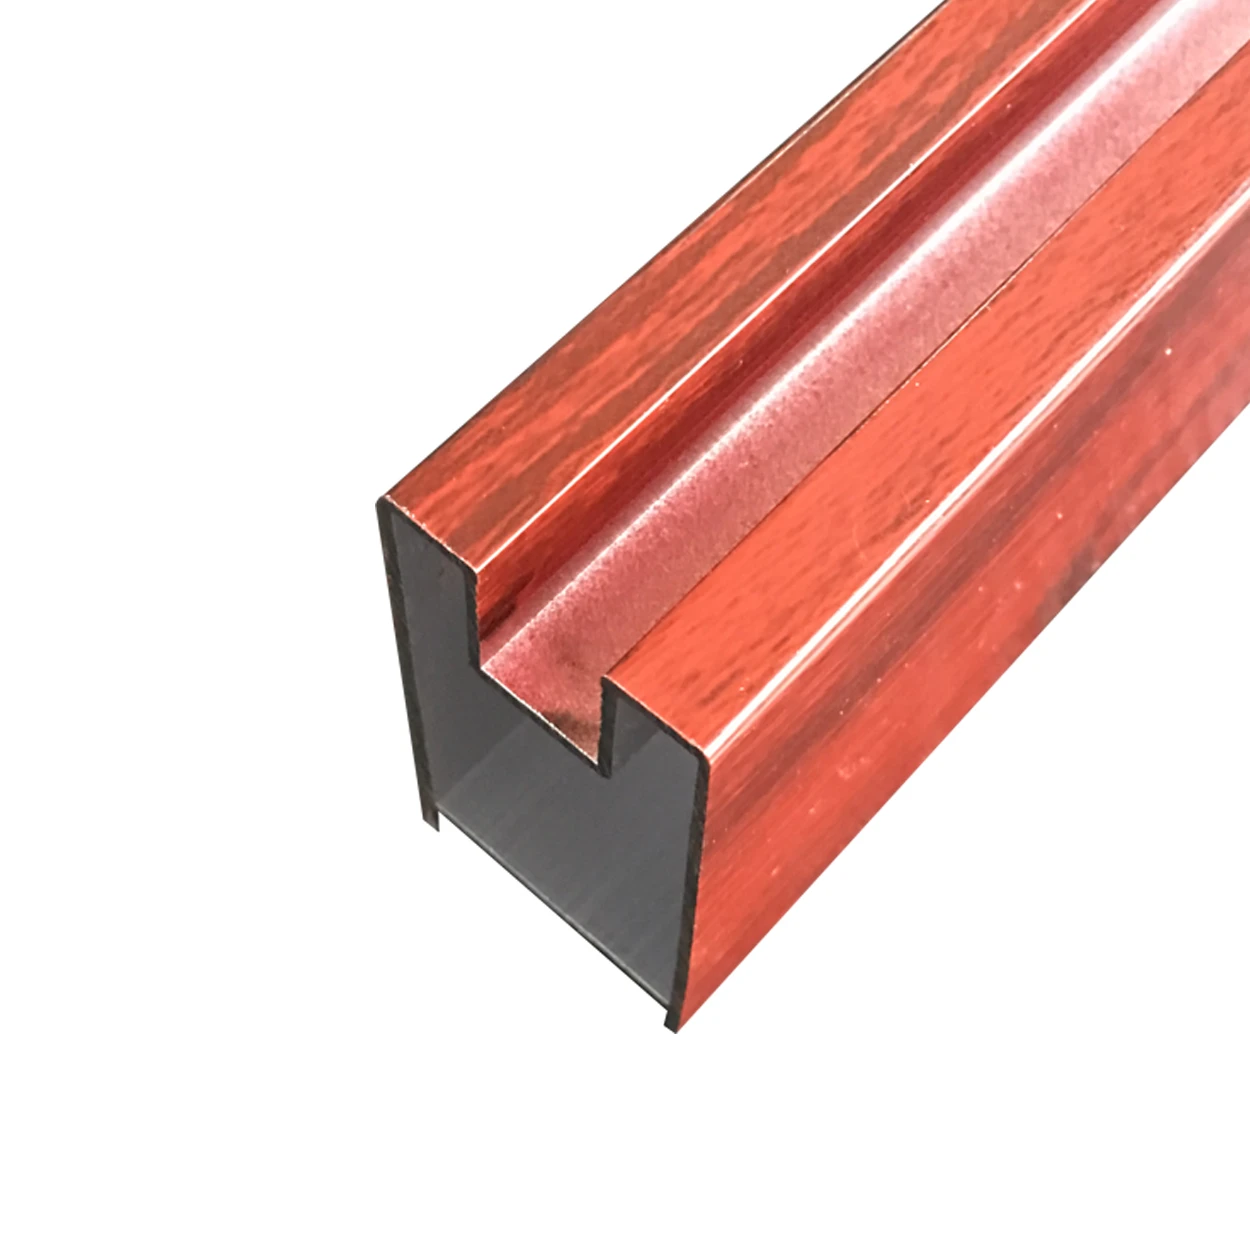 Hot sale industrial wood grain cabinet wall cladding aluminum extrusion profiles